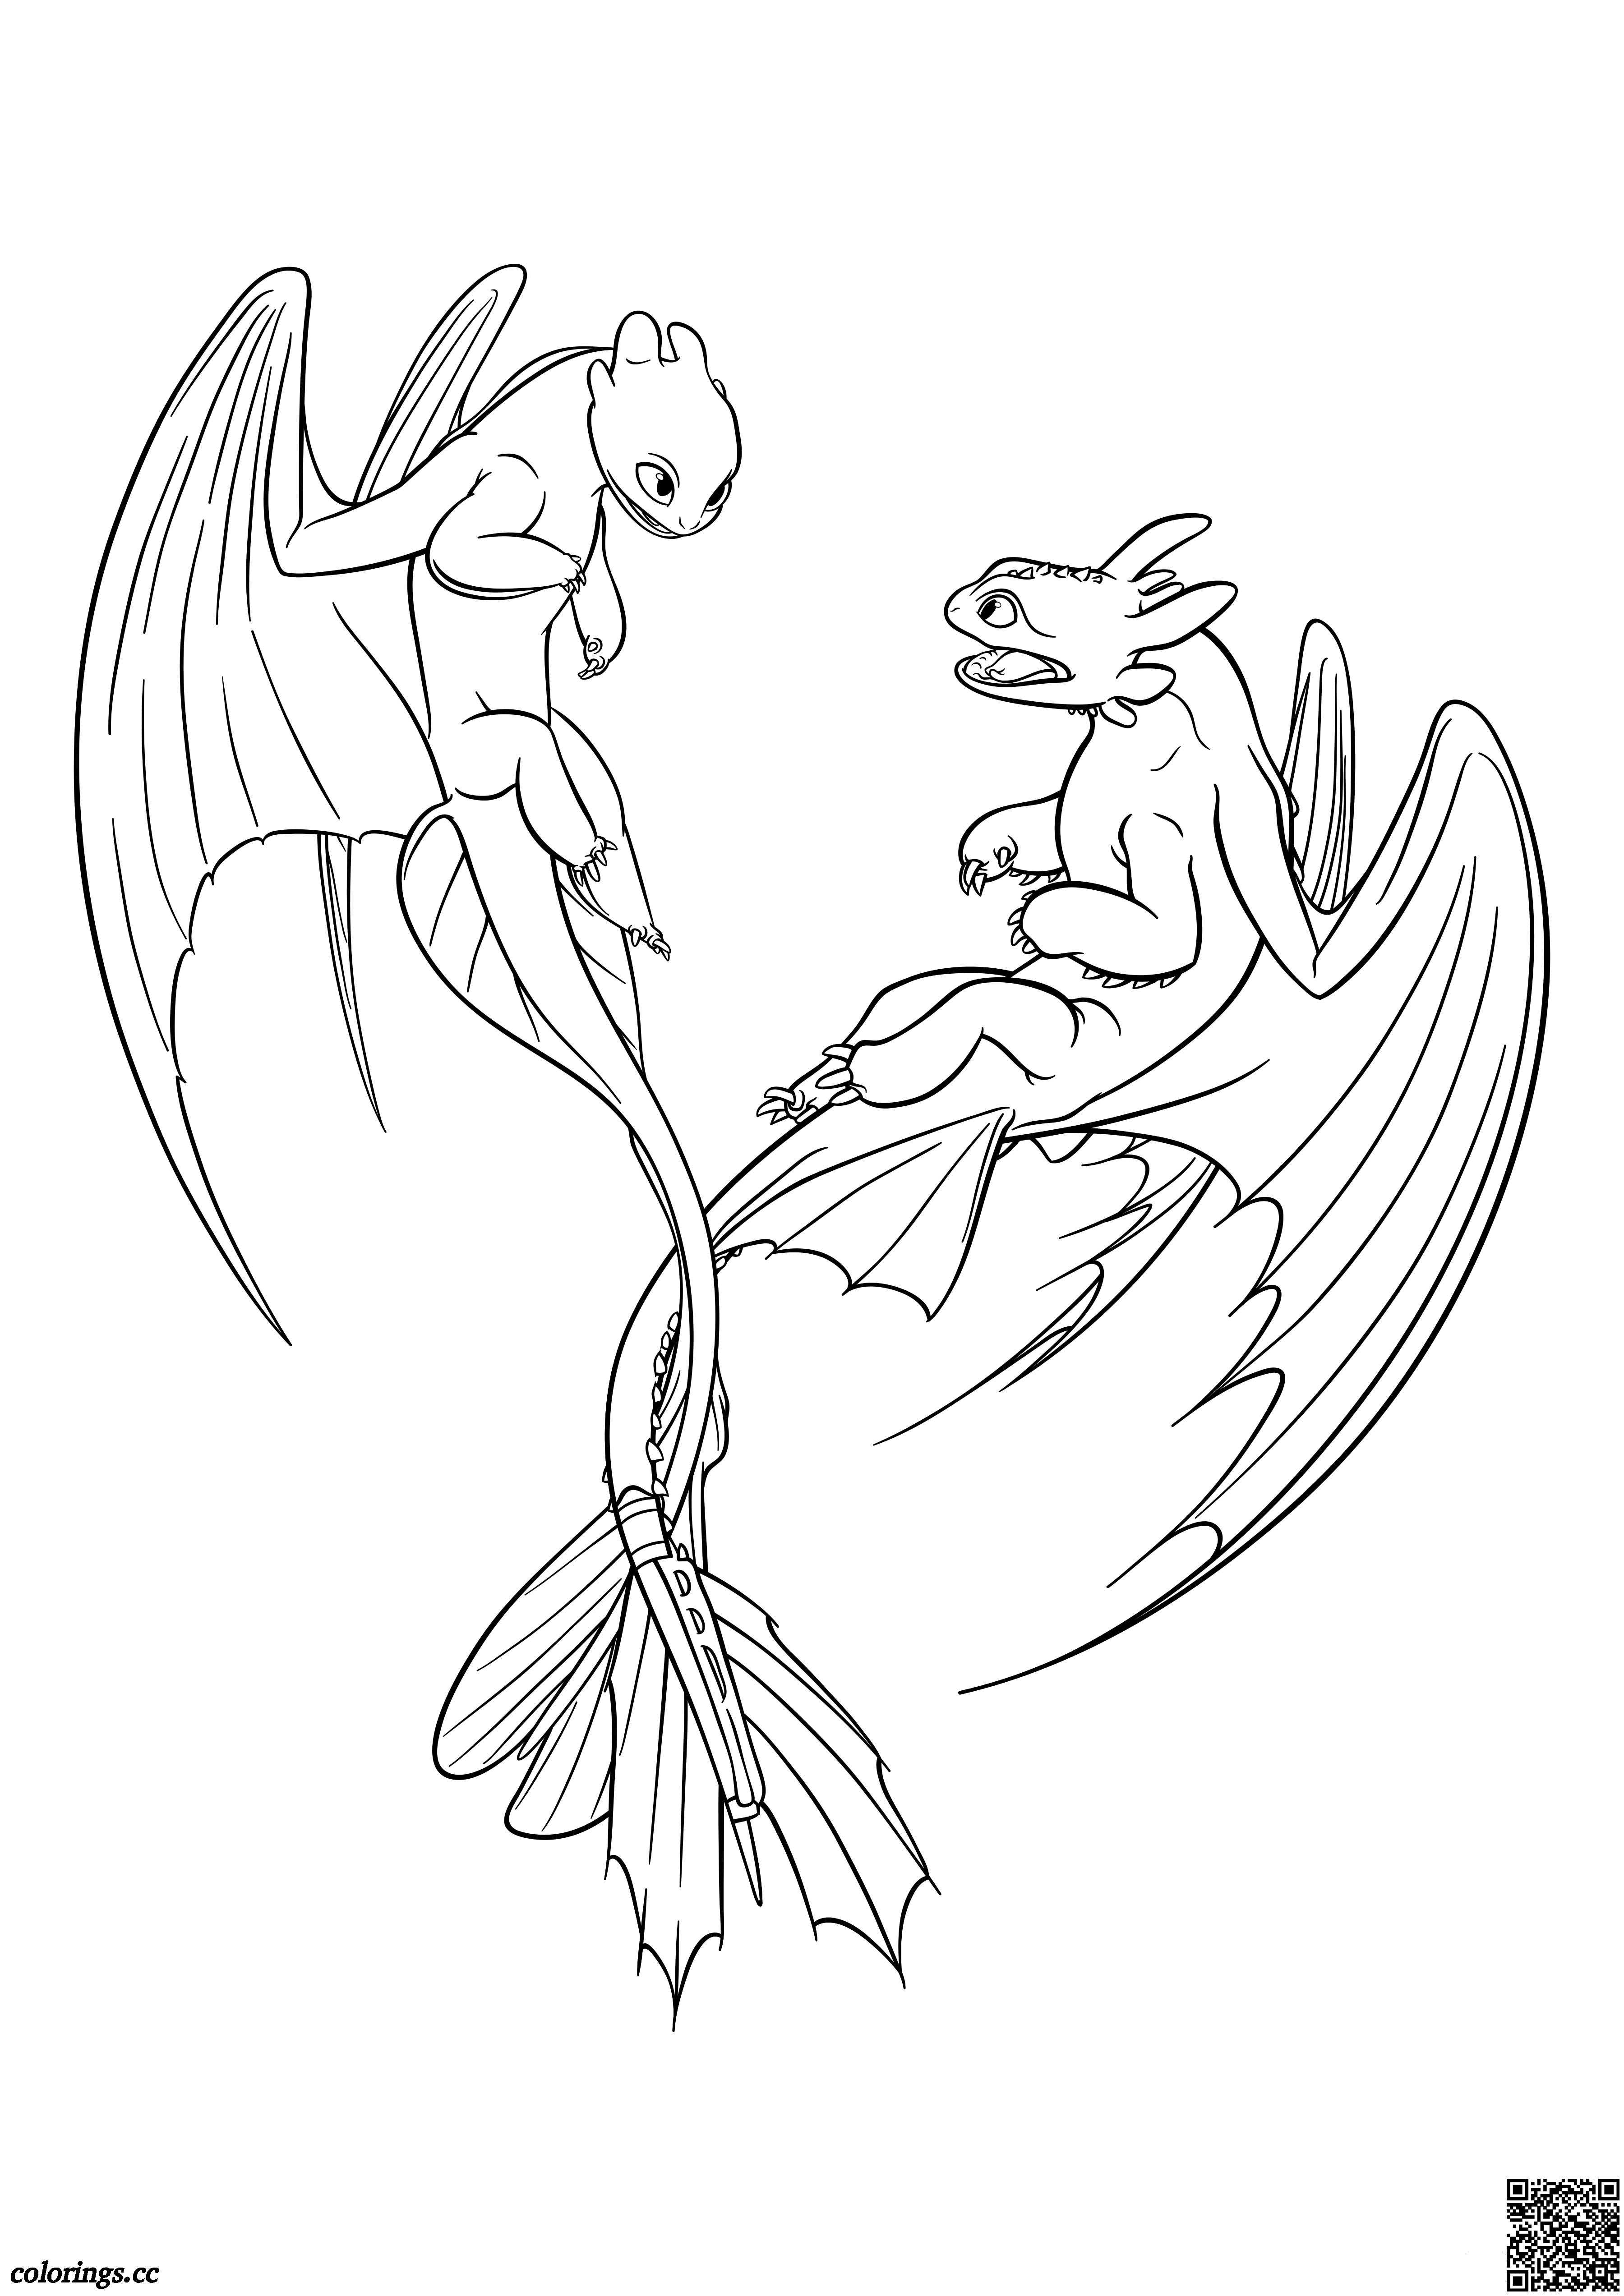 Light Fury and Toothless coloring pages, How to Train Your Dragon 3 ...